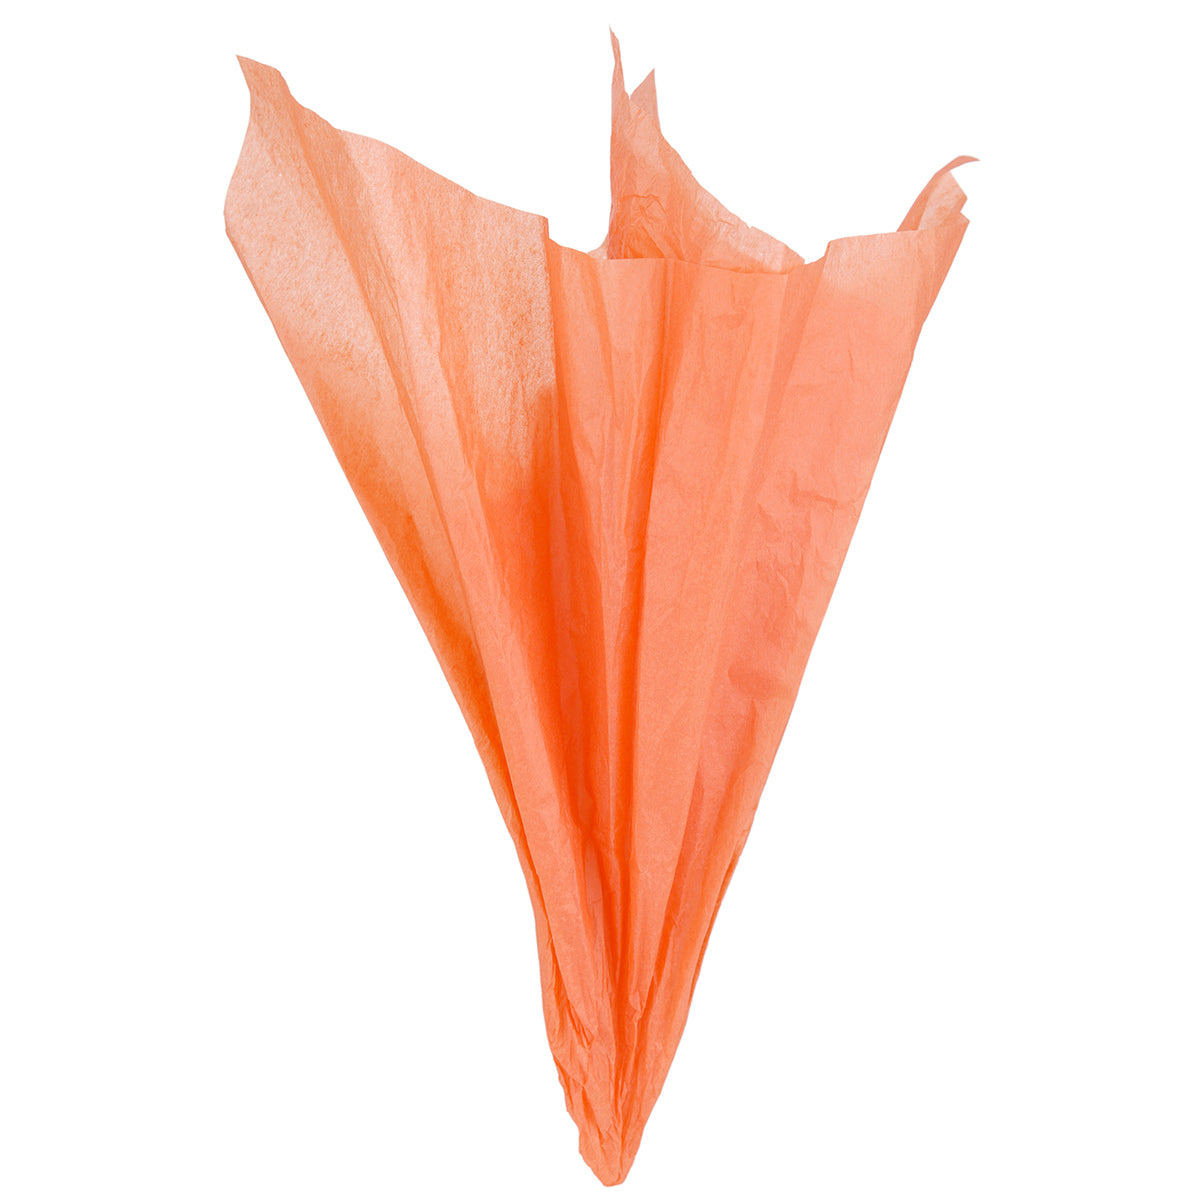 Displaying of a orange tissue paper in ice cream cone shape